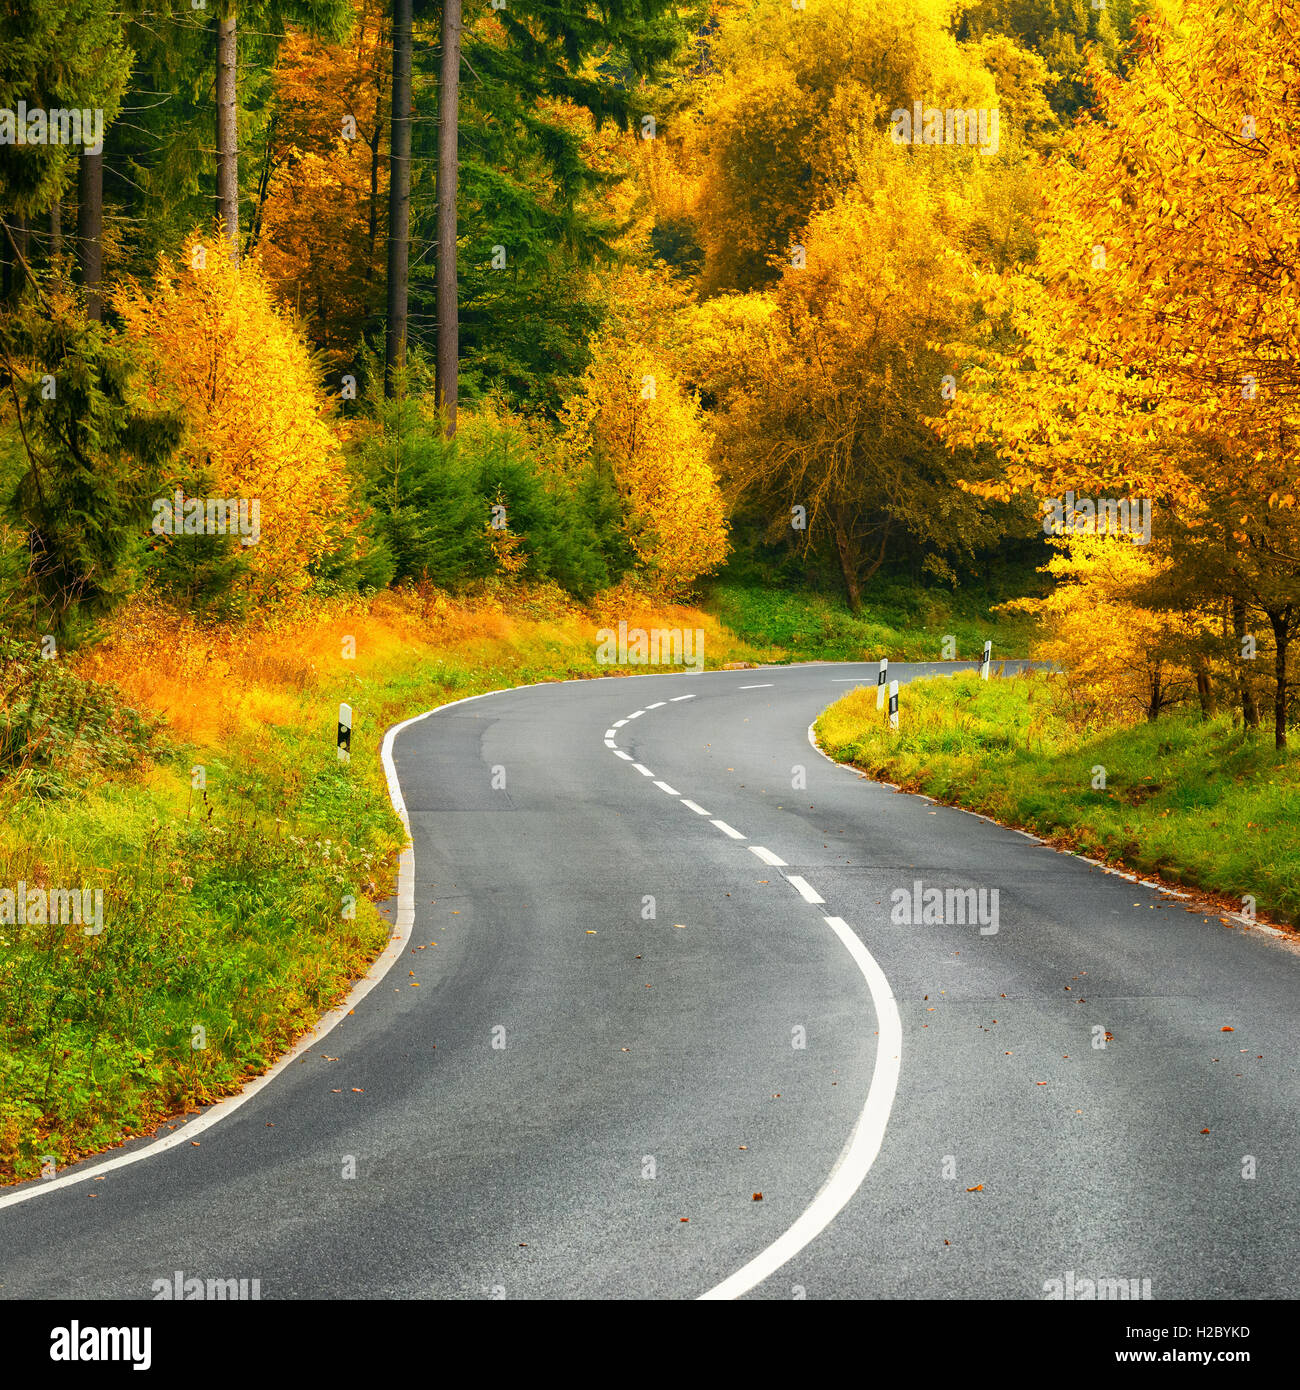 Landscape shot with a scenic road bend in a colorful autumn forest Stock Photo